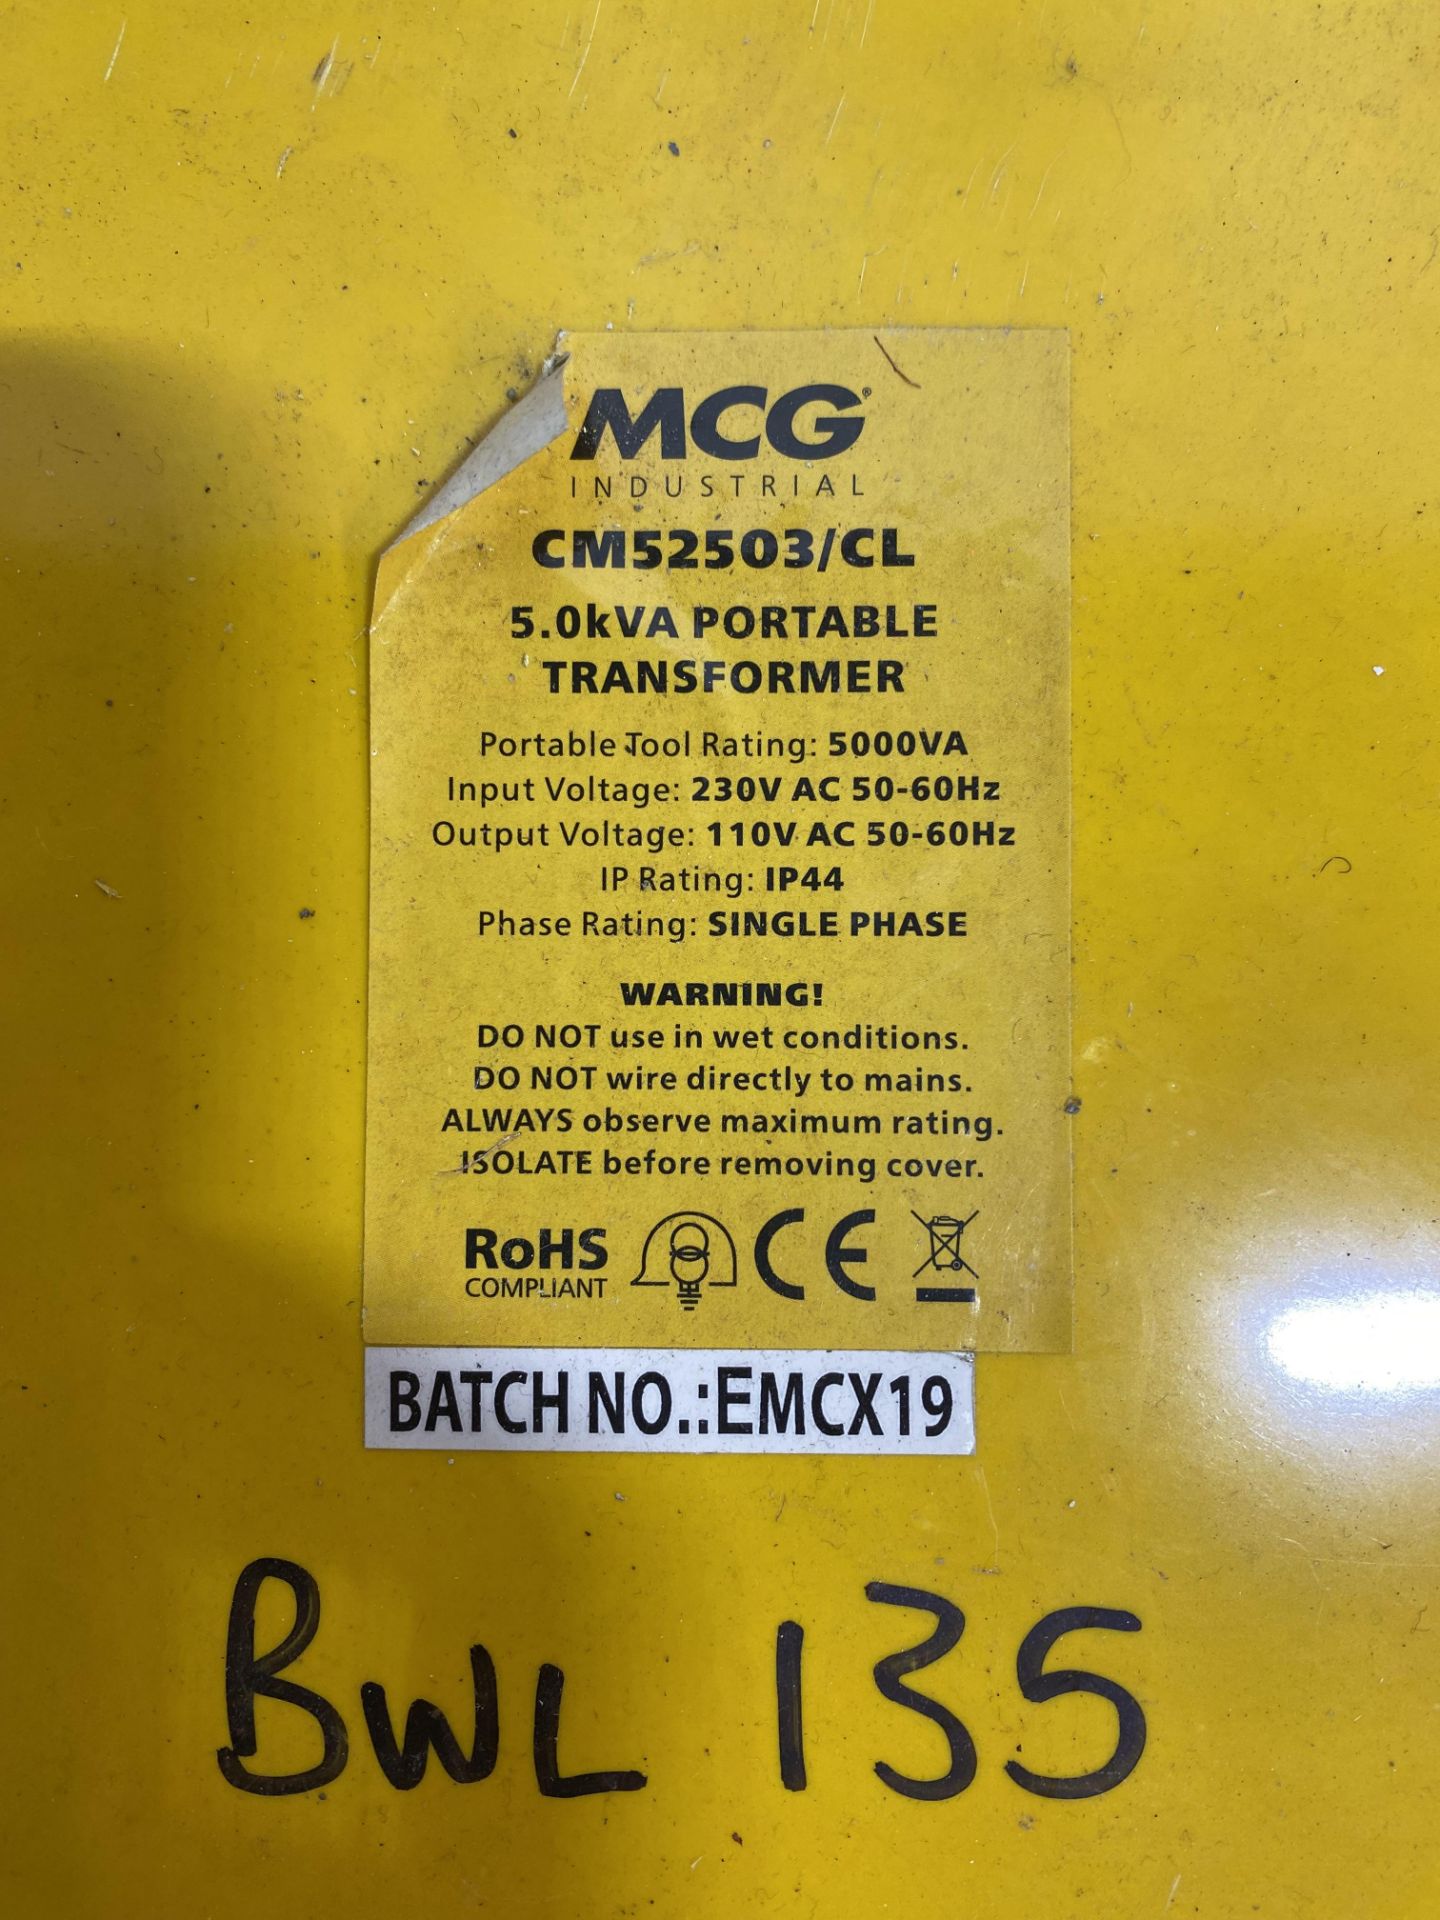 4 x MCG Industrial CM2503/CL 5.0kva Single Phase 110v Portable Transformers - Image 11 of 12